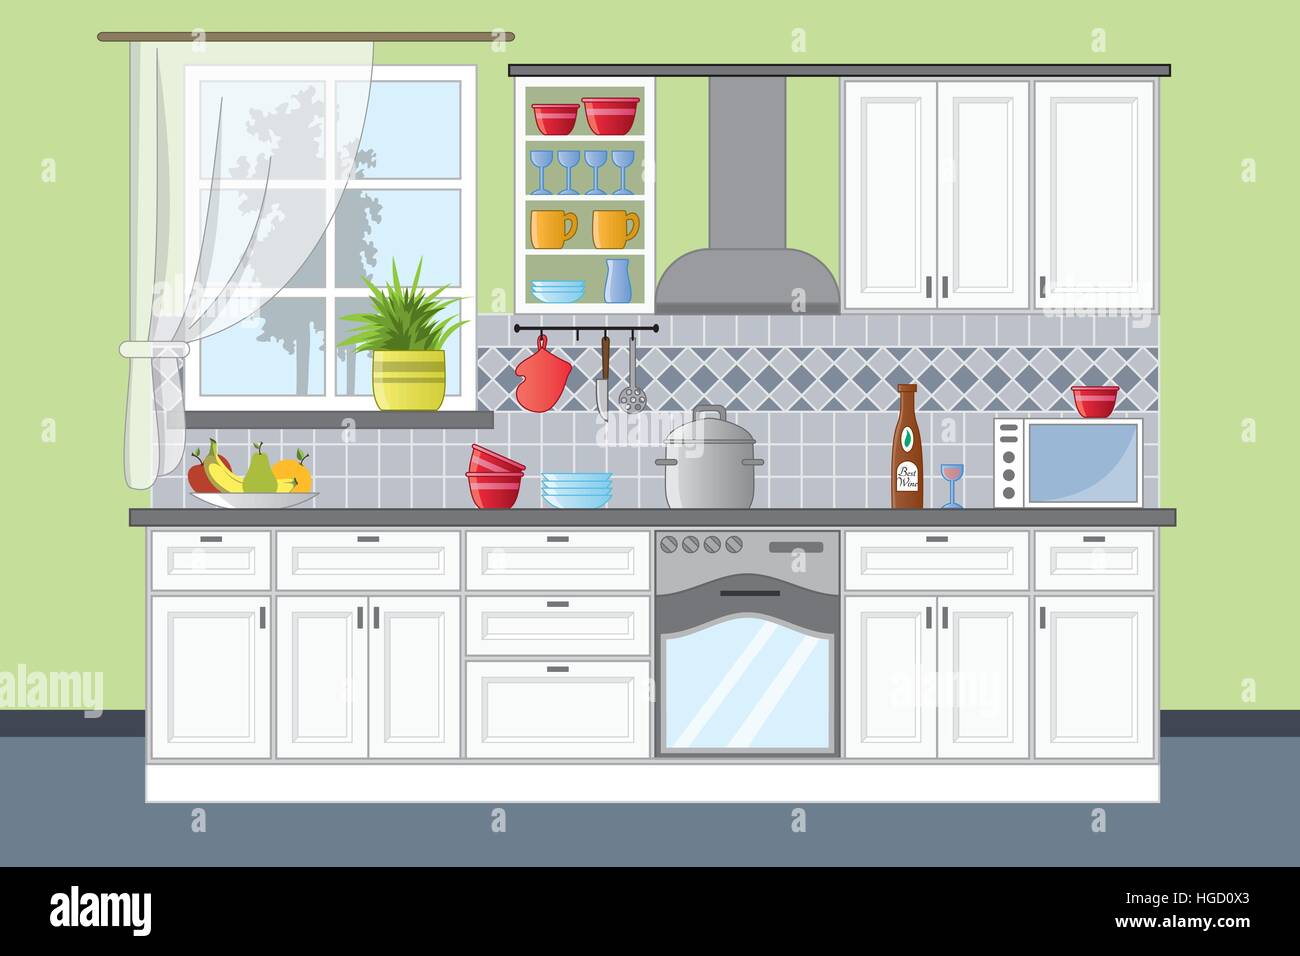 Classic kitchen interior in flat style Stock Vector